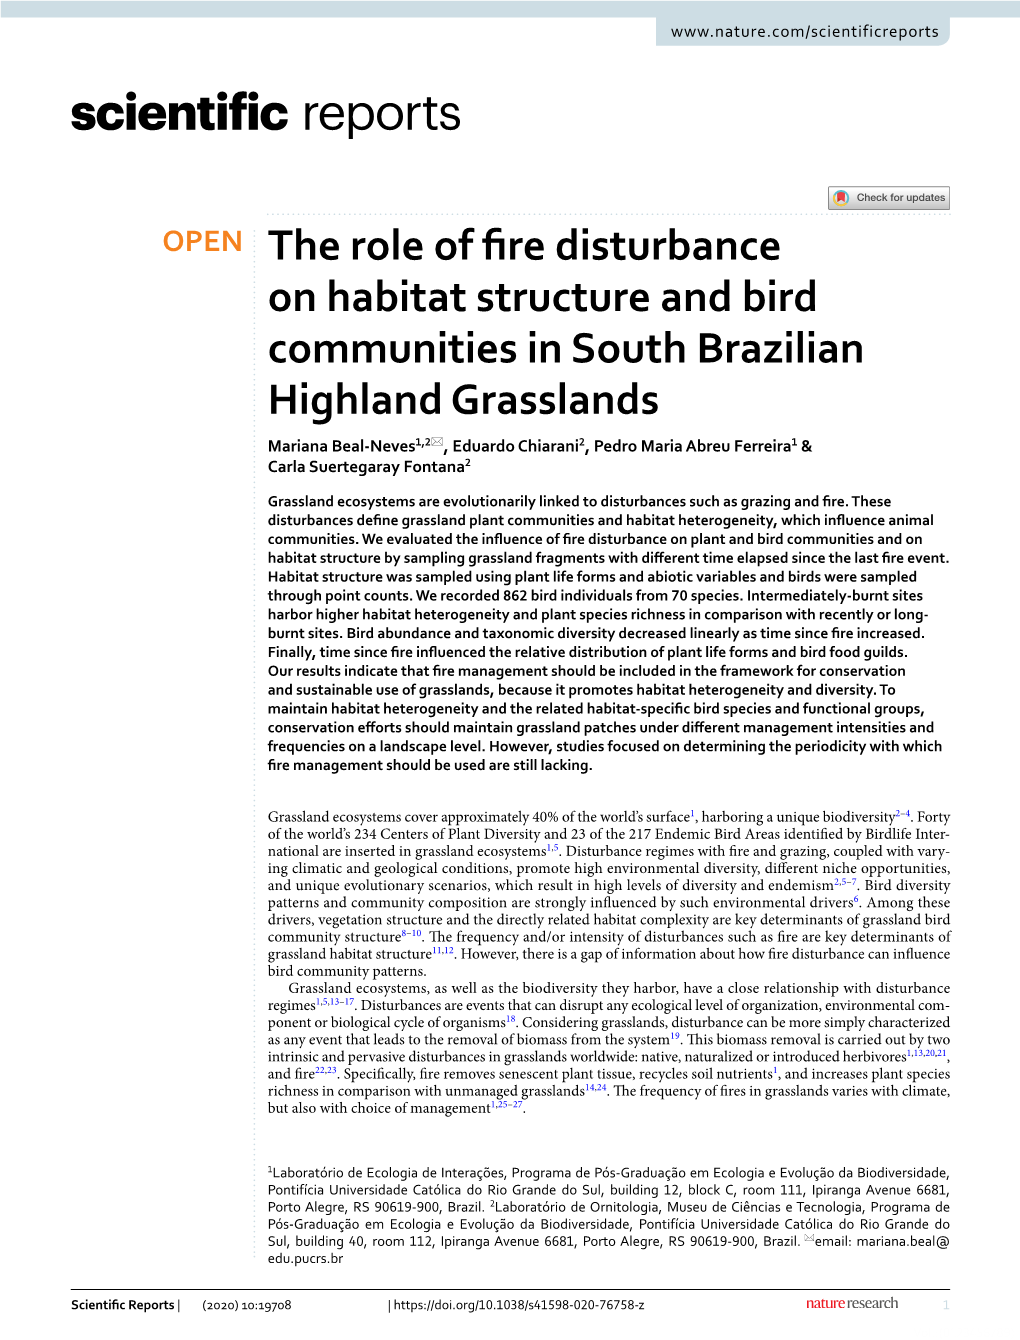 The Role of Fire Disturbance on Habitat Structure and Bird